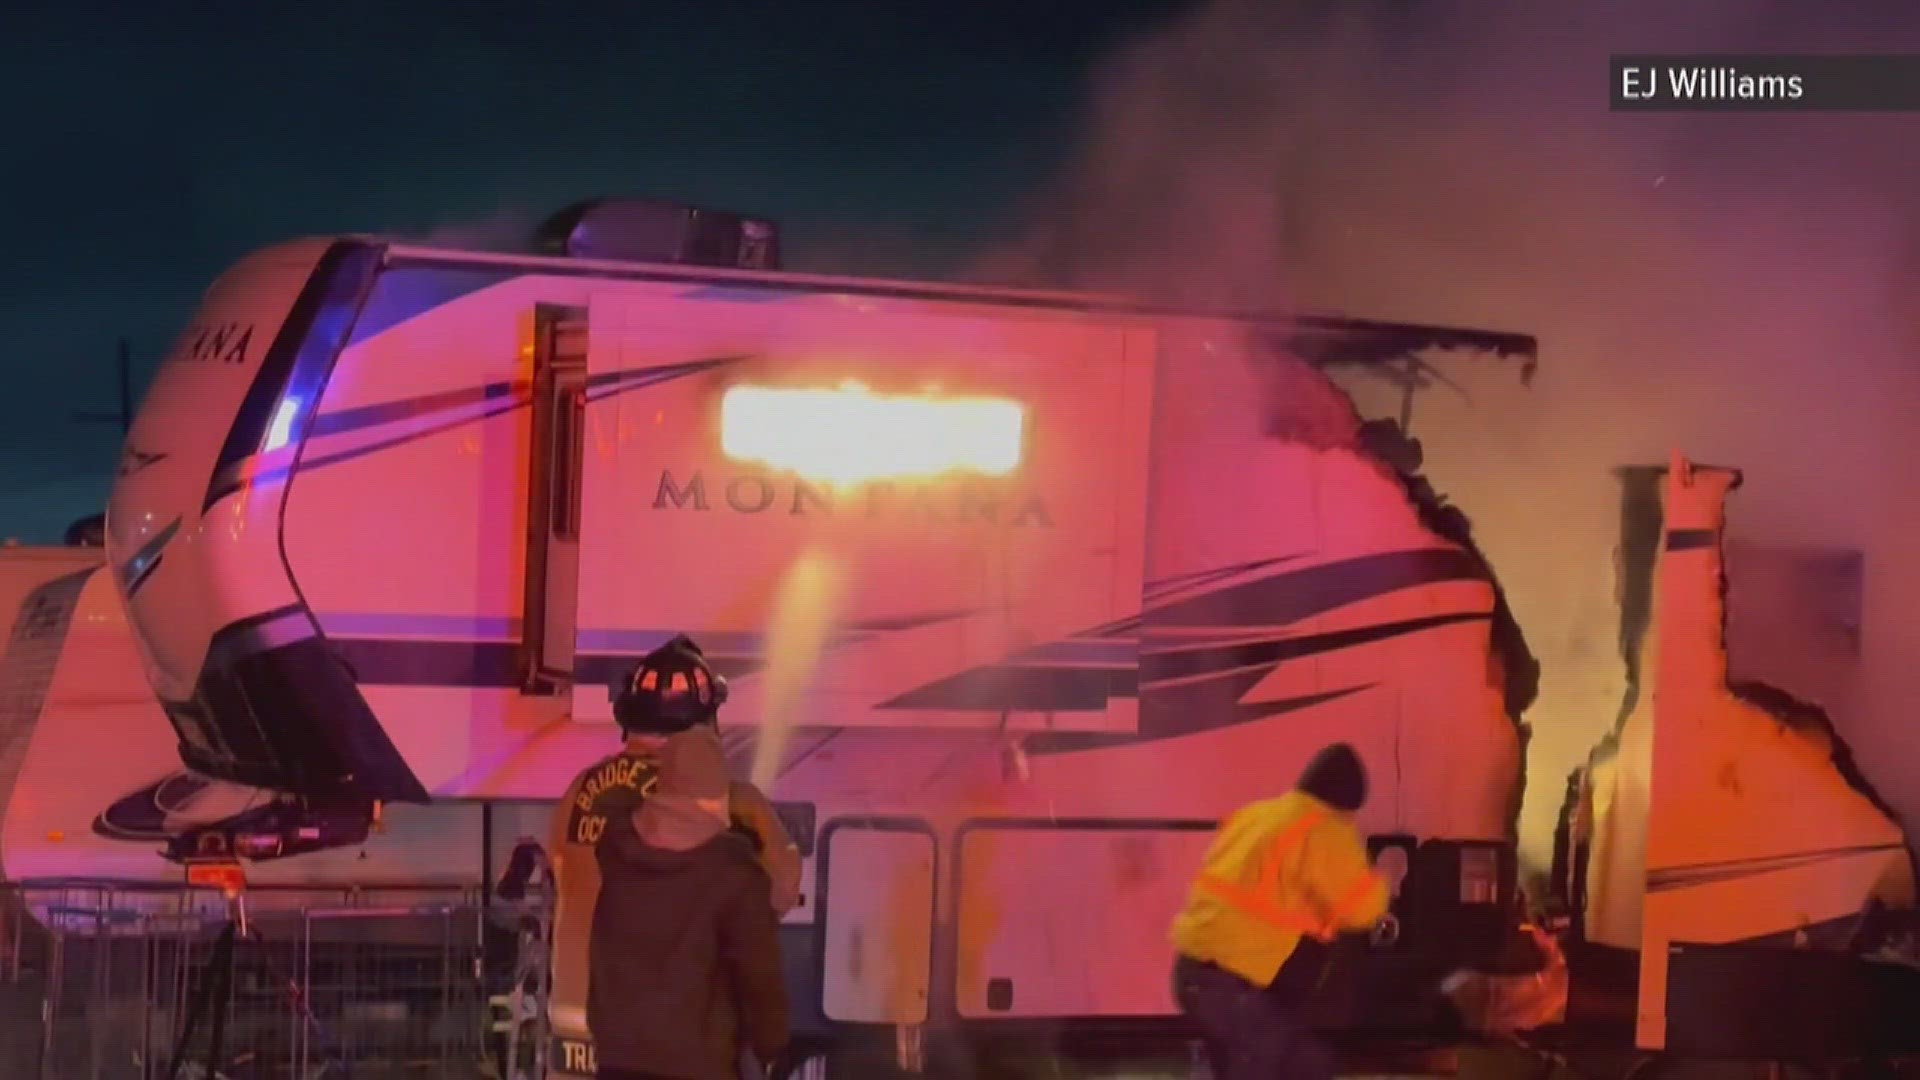 Firefighters believe the fire, which totally destroyed the trailer, was started by an "electric fireplace heater."